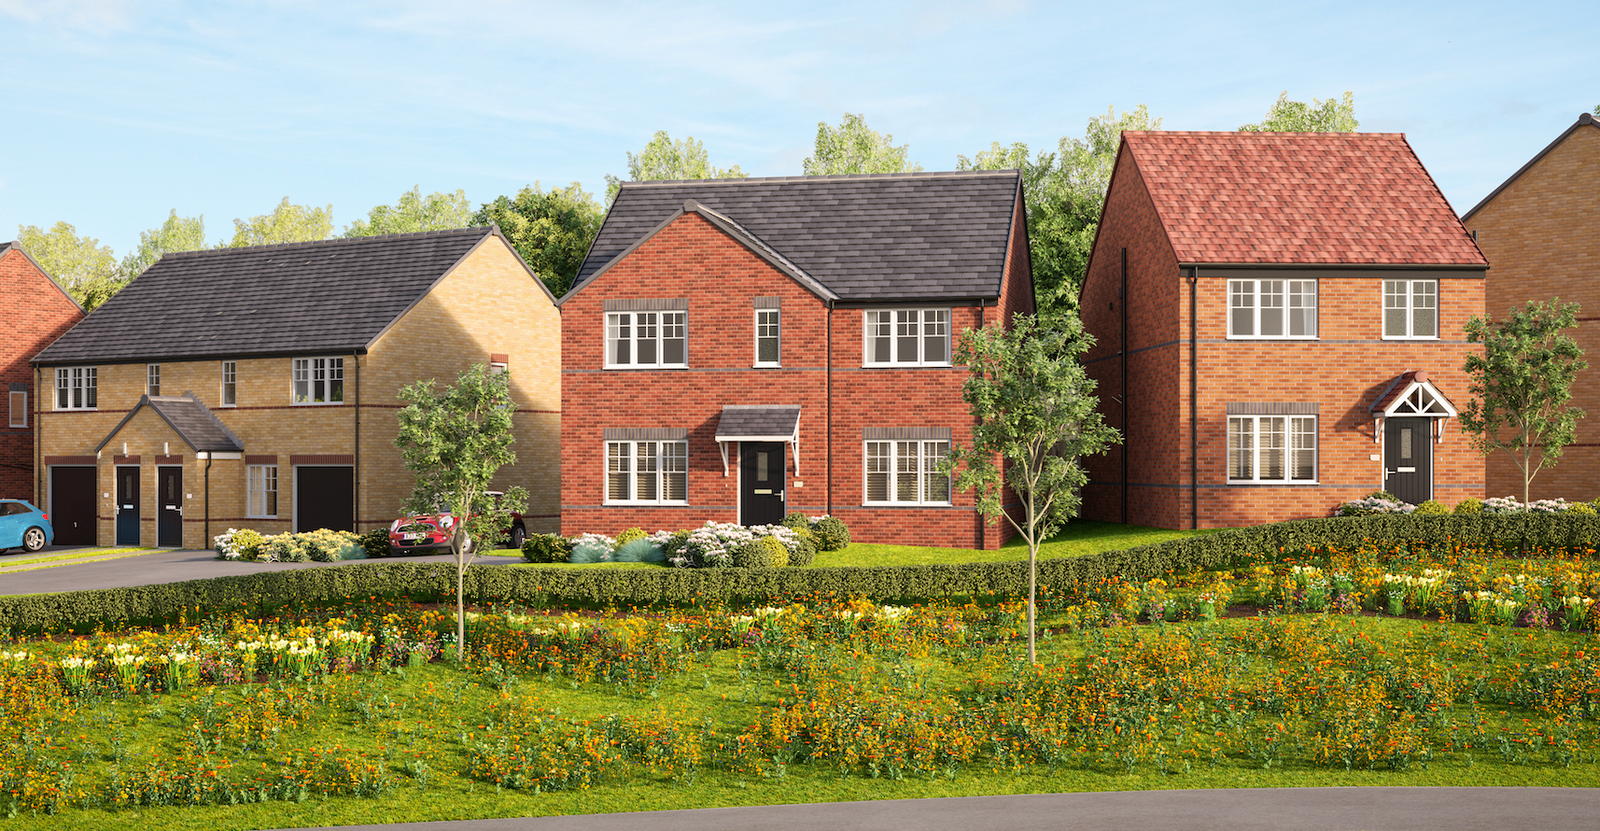 Avant Homes launches first family homes at Skelton Gate